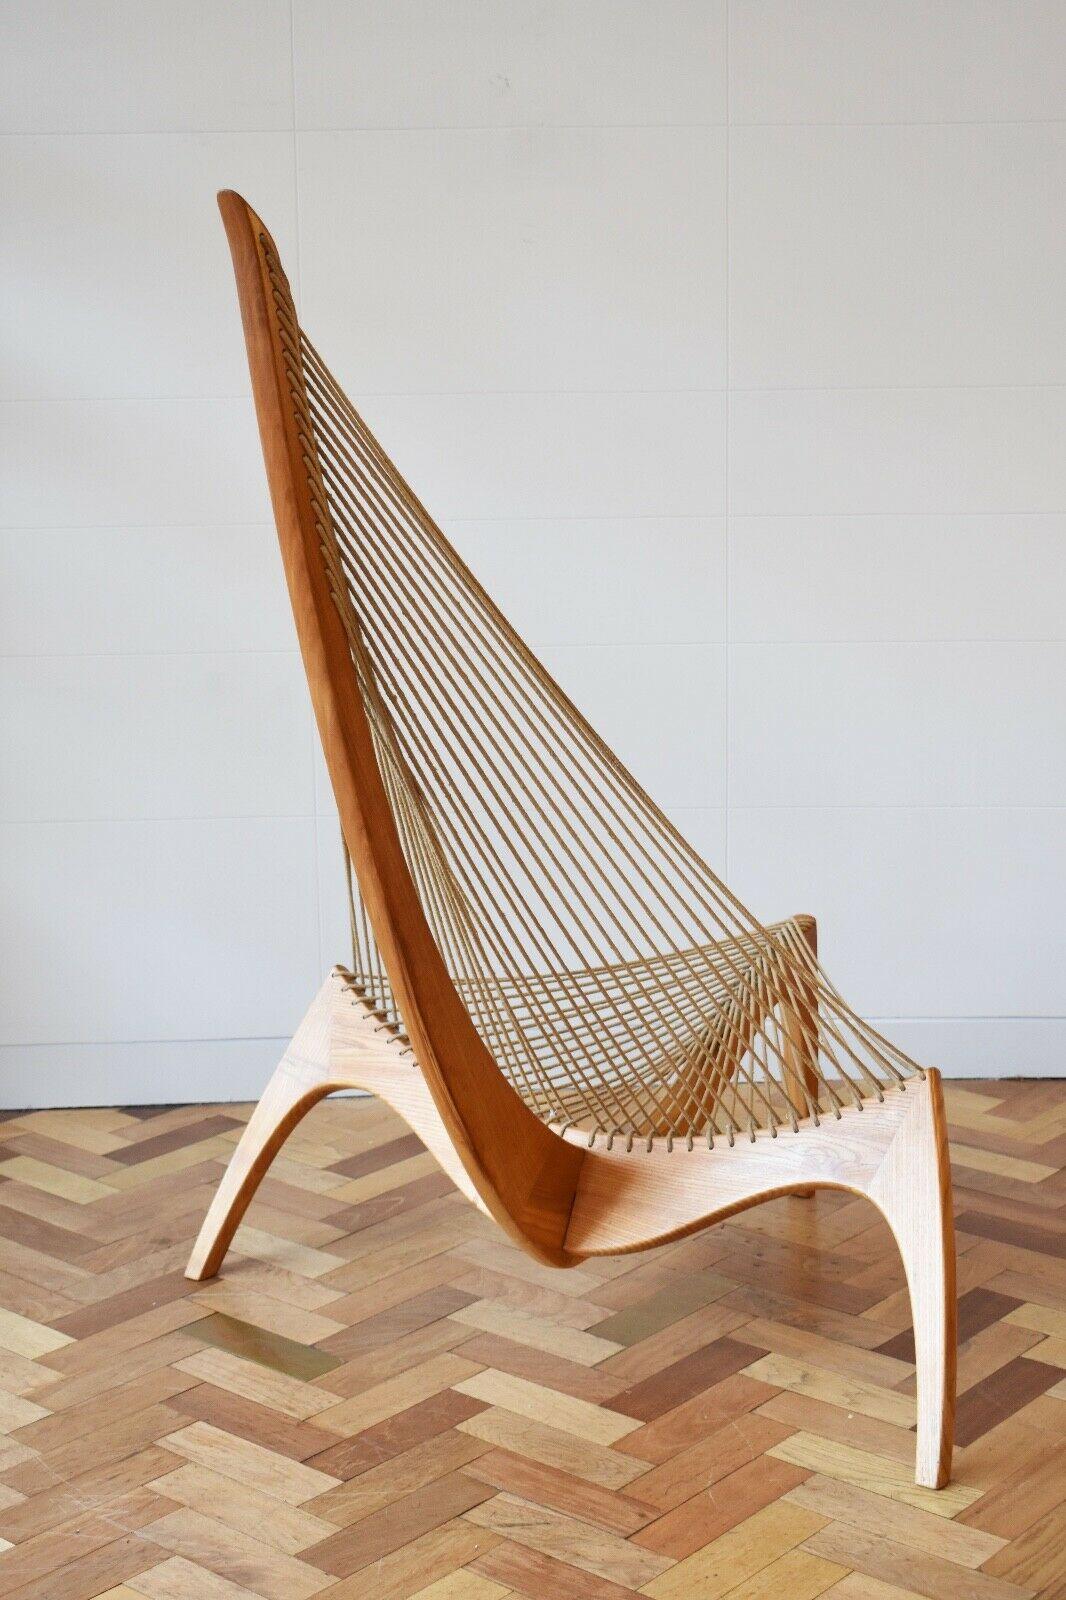 Fantastic early ‘harp chair’ designed by Jorgen Hovelskov and manufactured by Jørgen Christensen, Denmark 1963.

Superbly sculptural lounge chair that also seats comfortable and looks great and would be a great statement piece in any